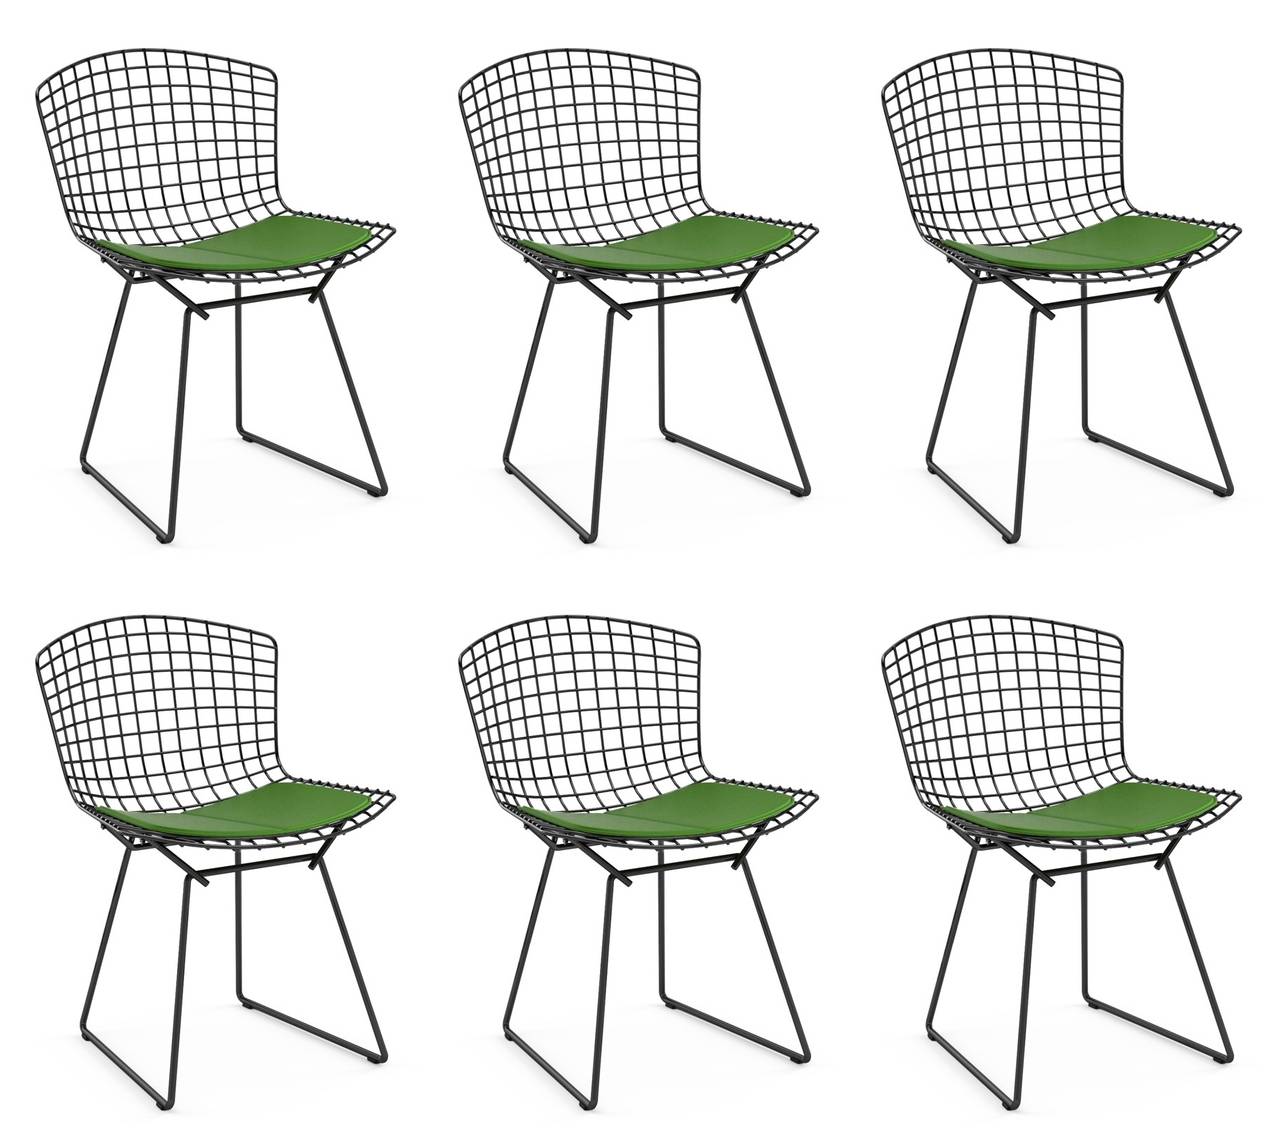 Beautiful set of six side chairs designed by Harry Bertoia and manufactured by Knoll International.
The chairs are in very good original condition, not all but at least three to four chairs retain the original Knoll labels but they all came from